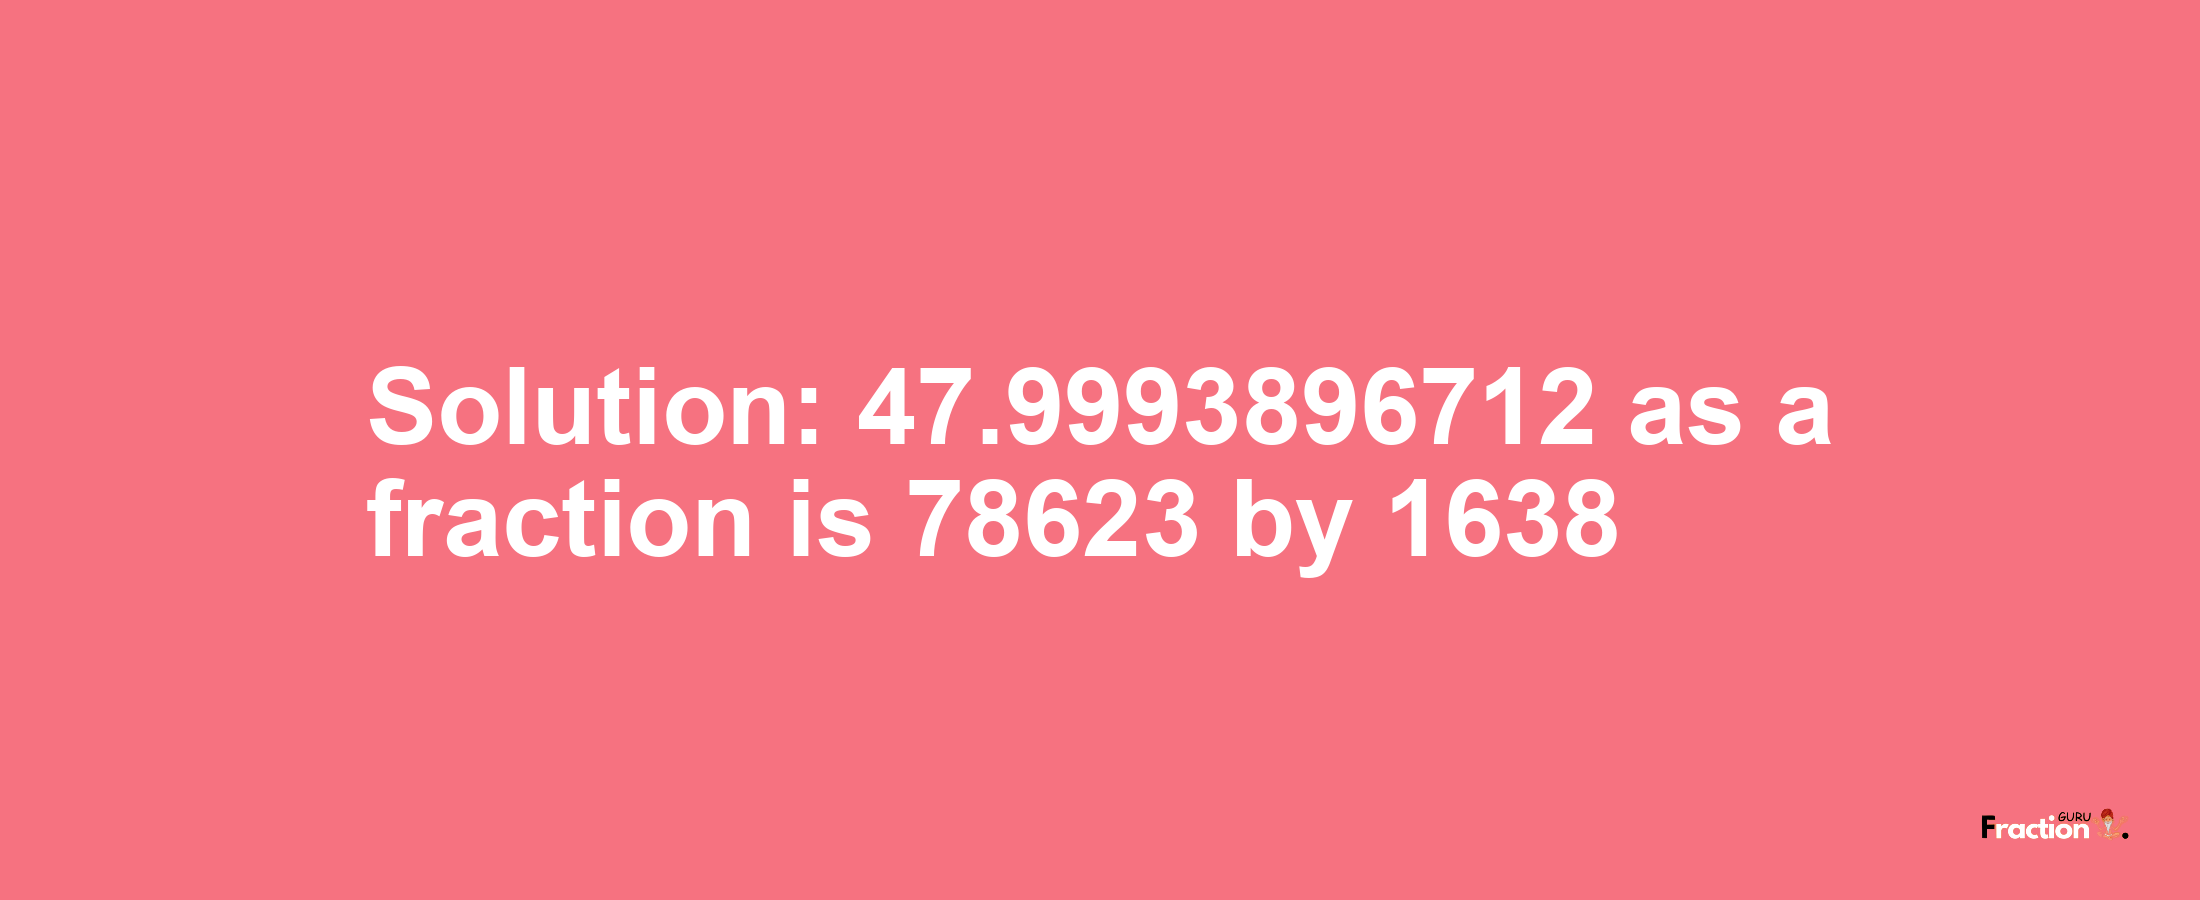 Solution:47.9993896712 as a fraction is 78623/1638